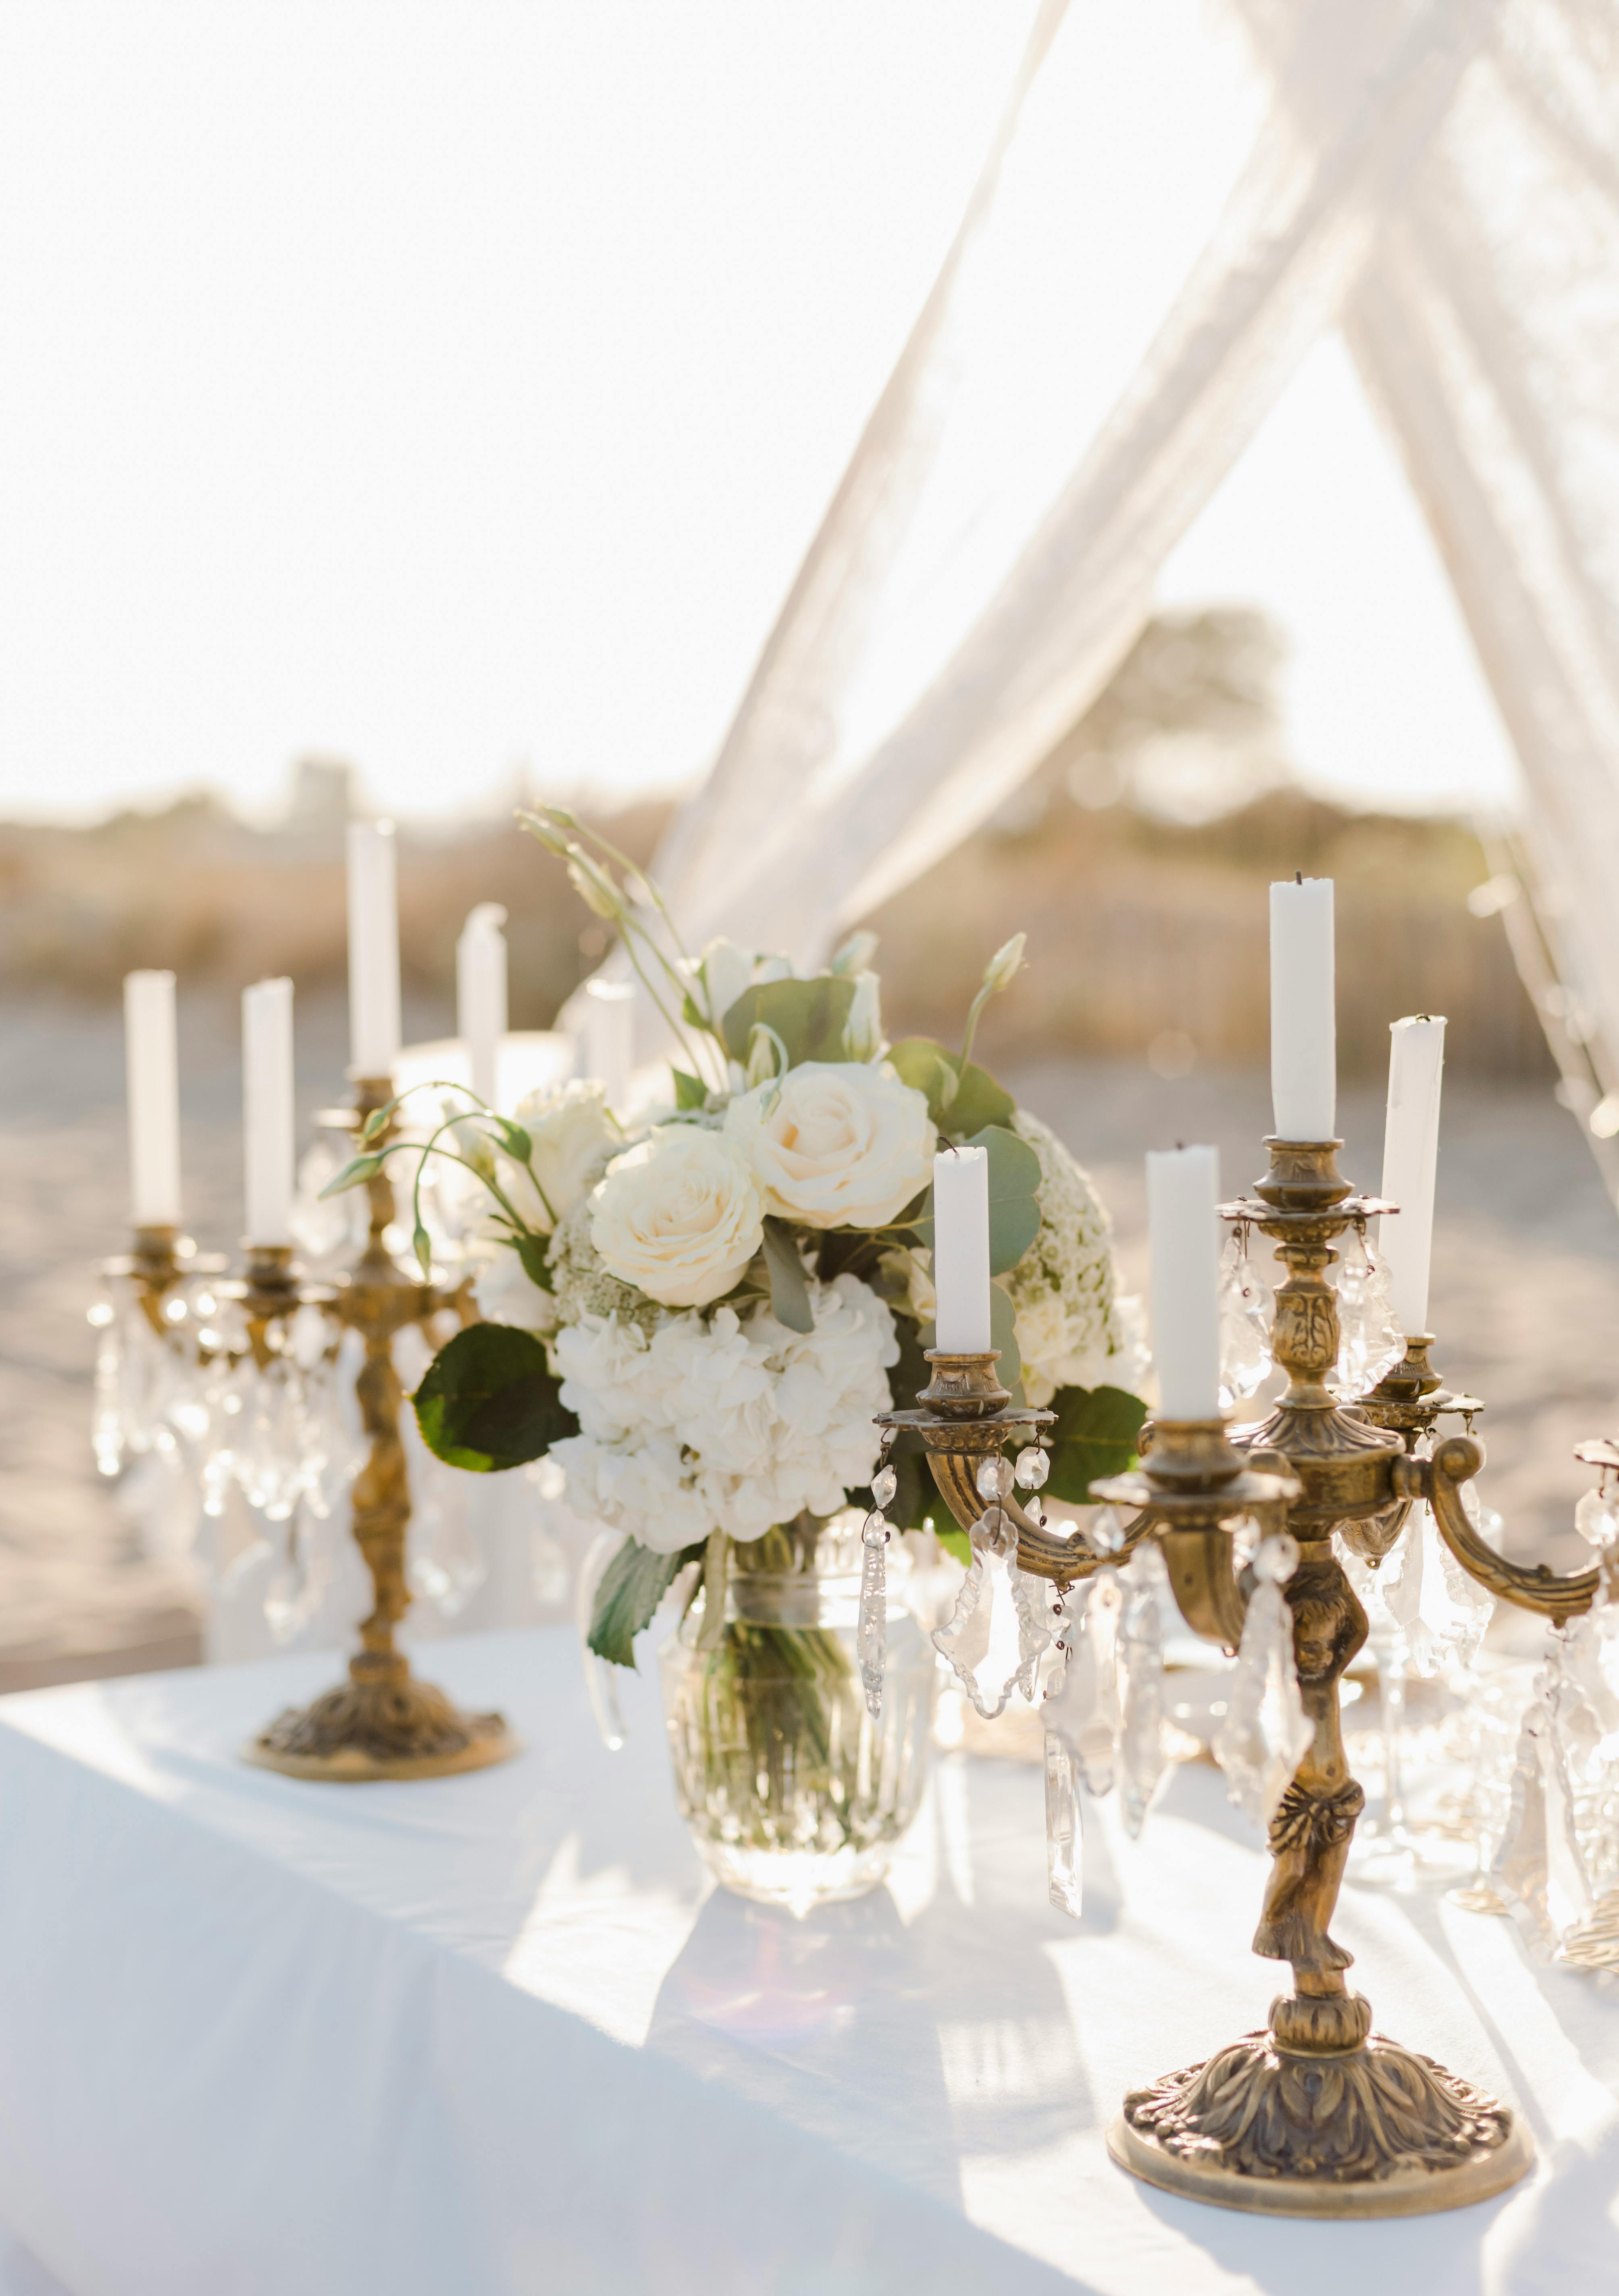 Candle holders and white bouquet in a vase | Source: Pexels